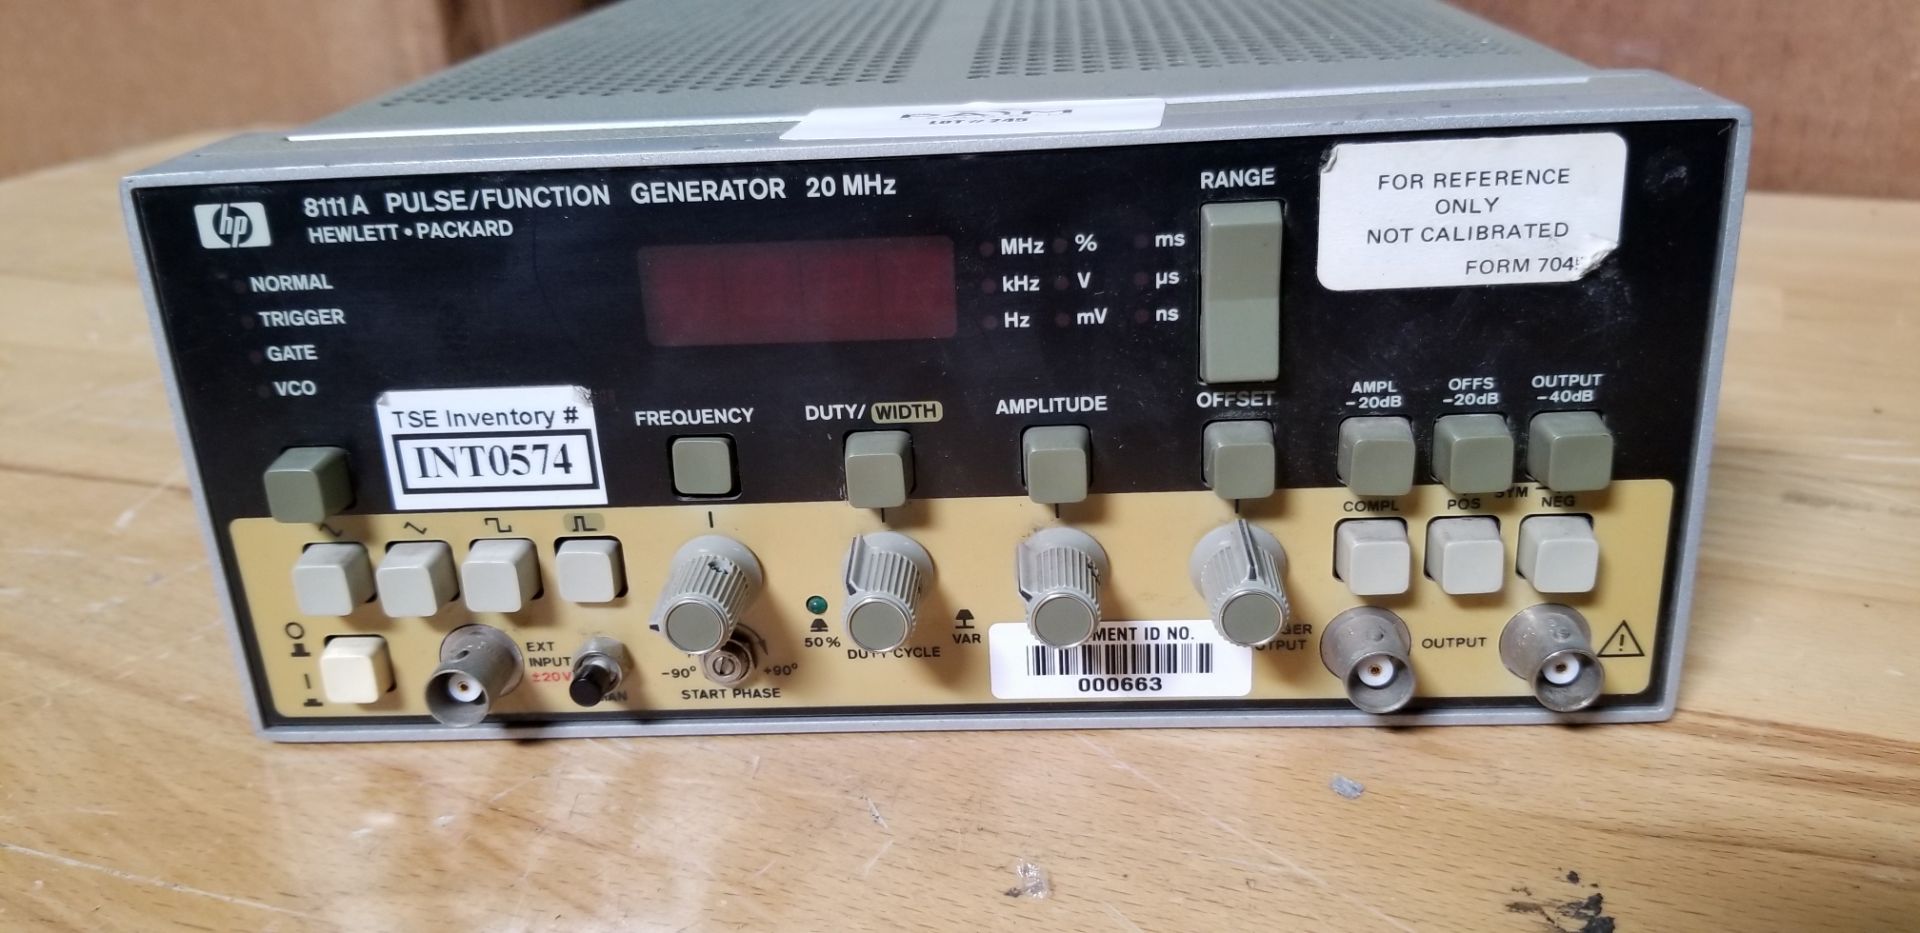 HP 8111A Pulse/Function Generator - Image 3 of 4